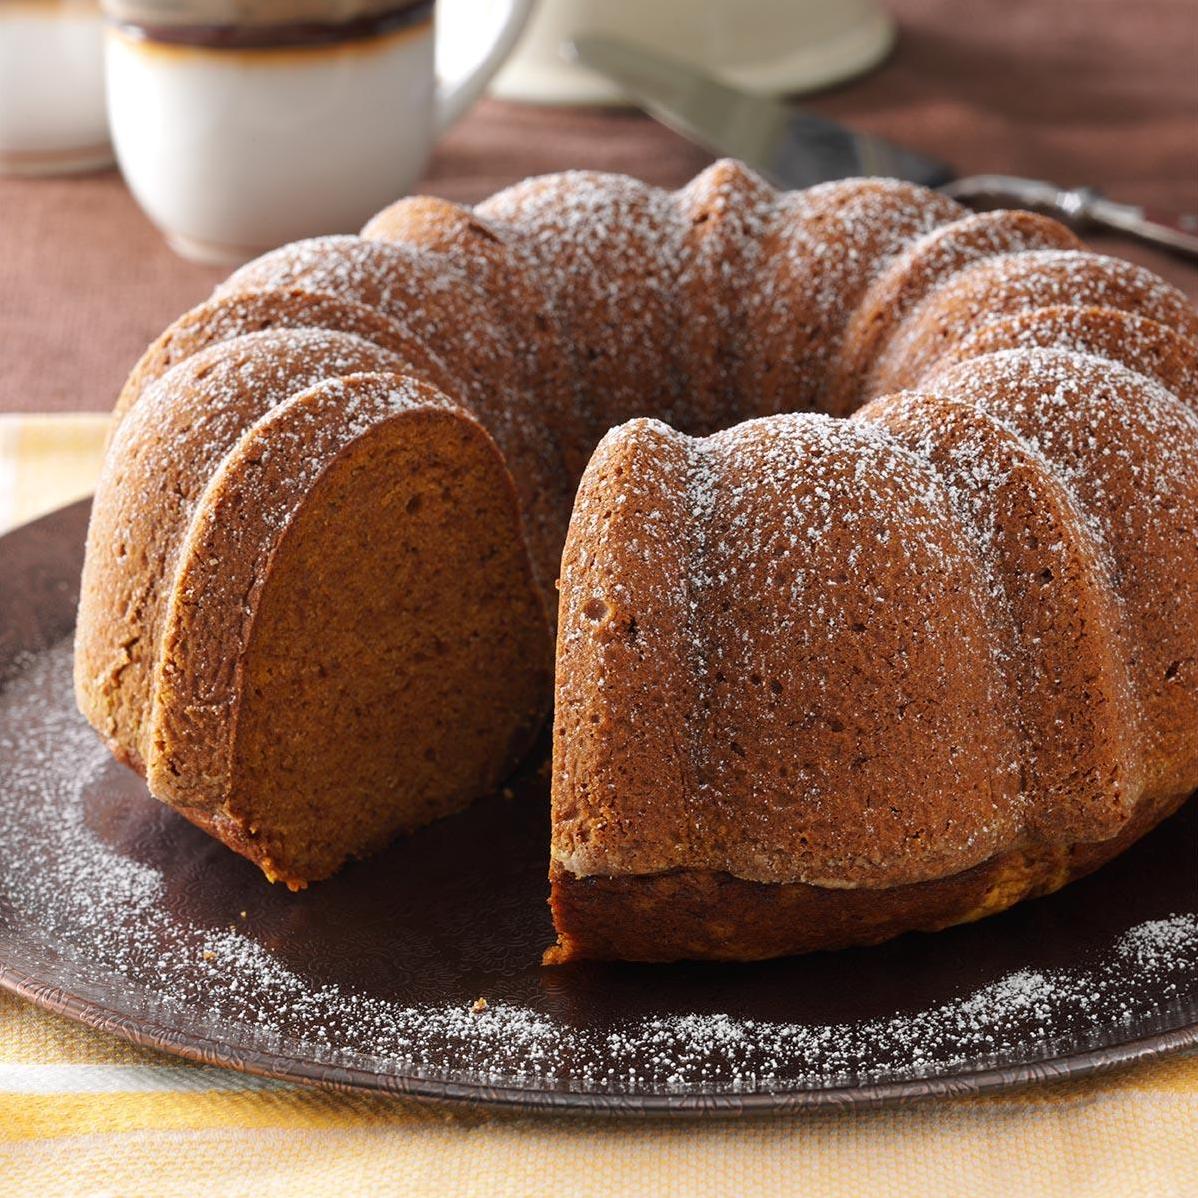  One bite of this Pumpkin Pound Cake and you'll fall in love with fall flavors all over again!